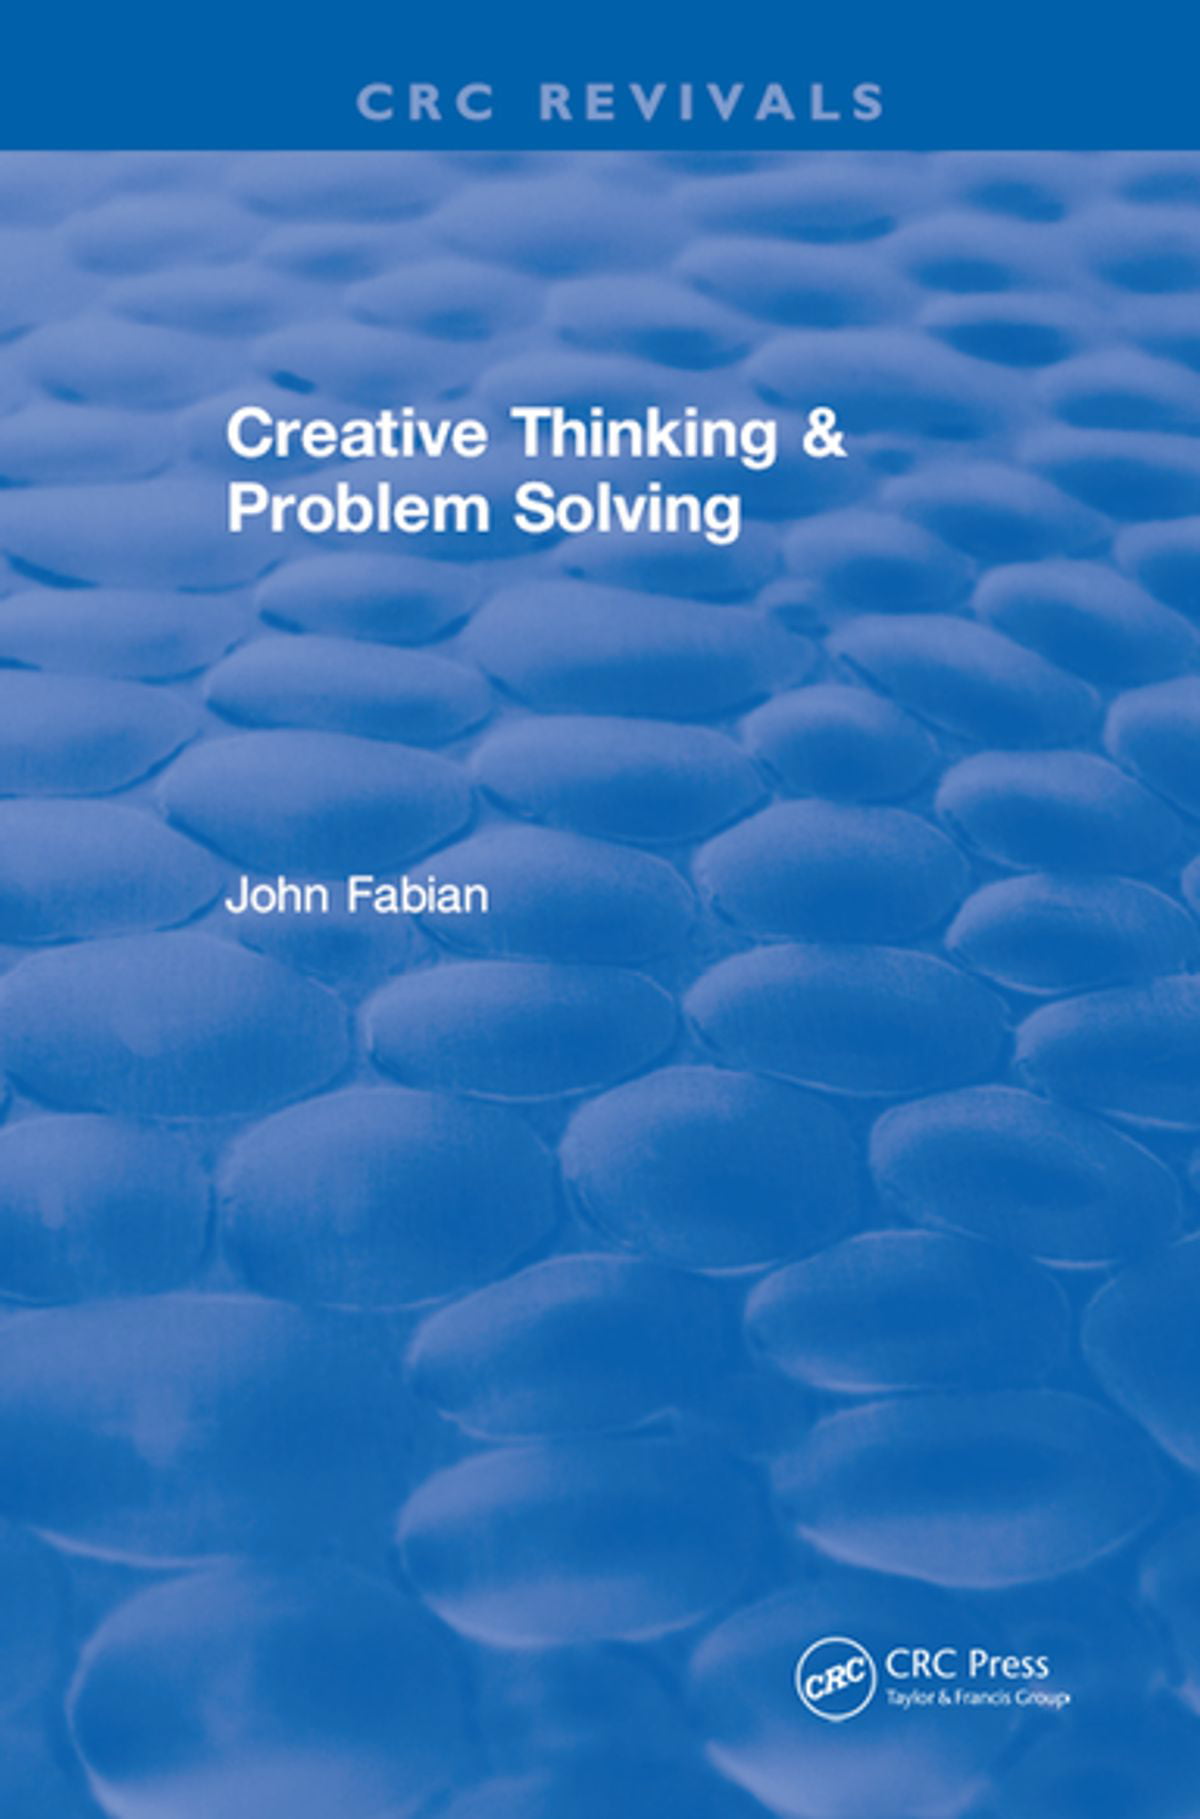 creative approaches to problem solving textbook